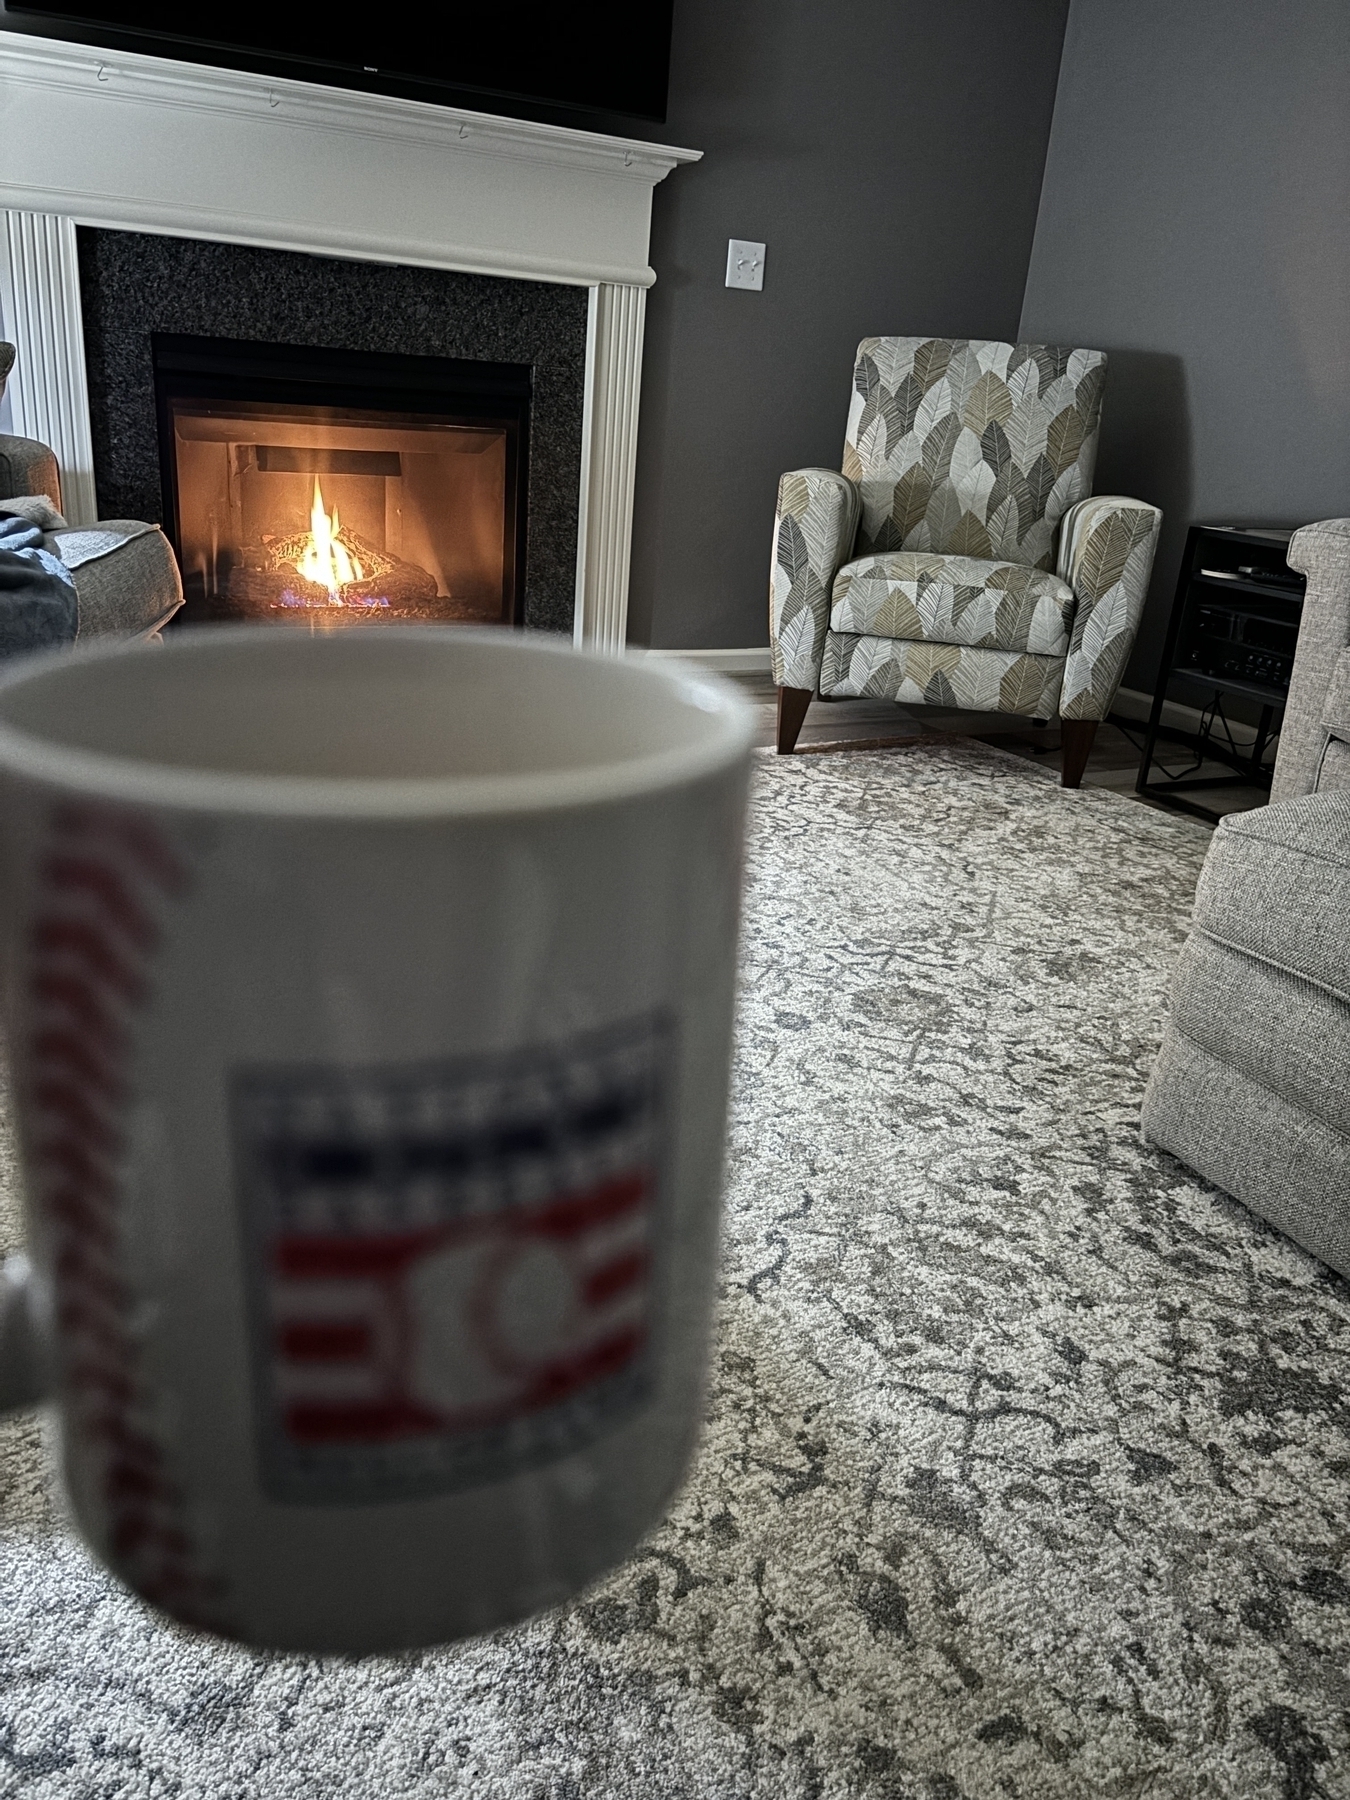 Coffee mug that says “national baseball hall of fame “ in front of an inviting fire 